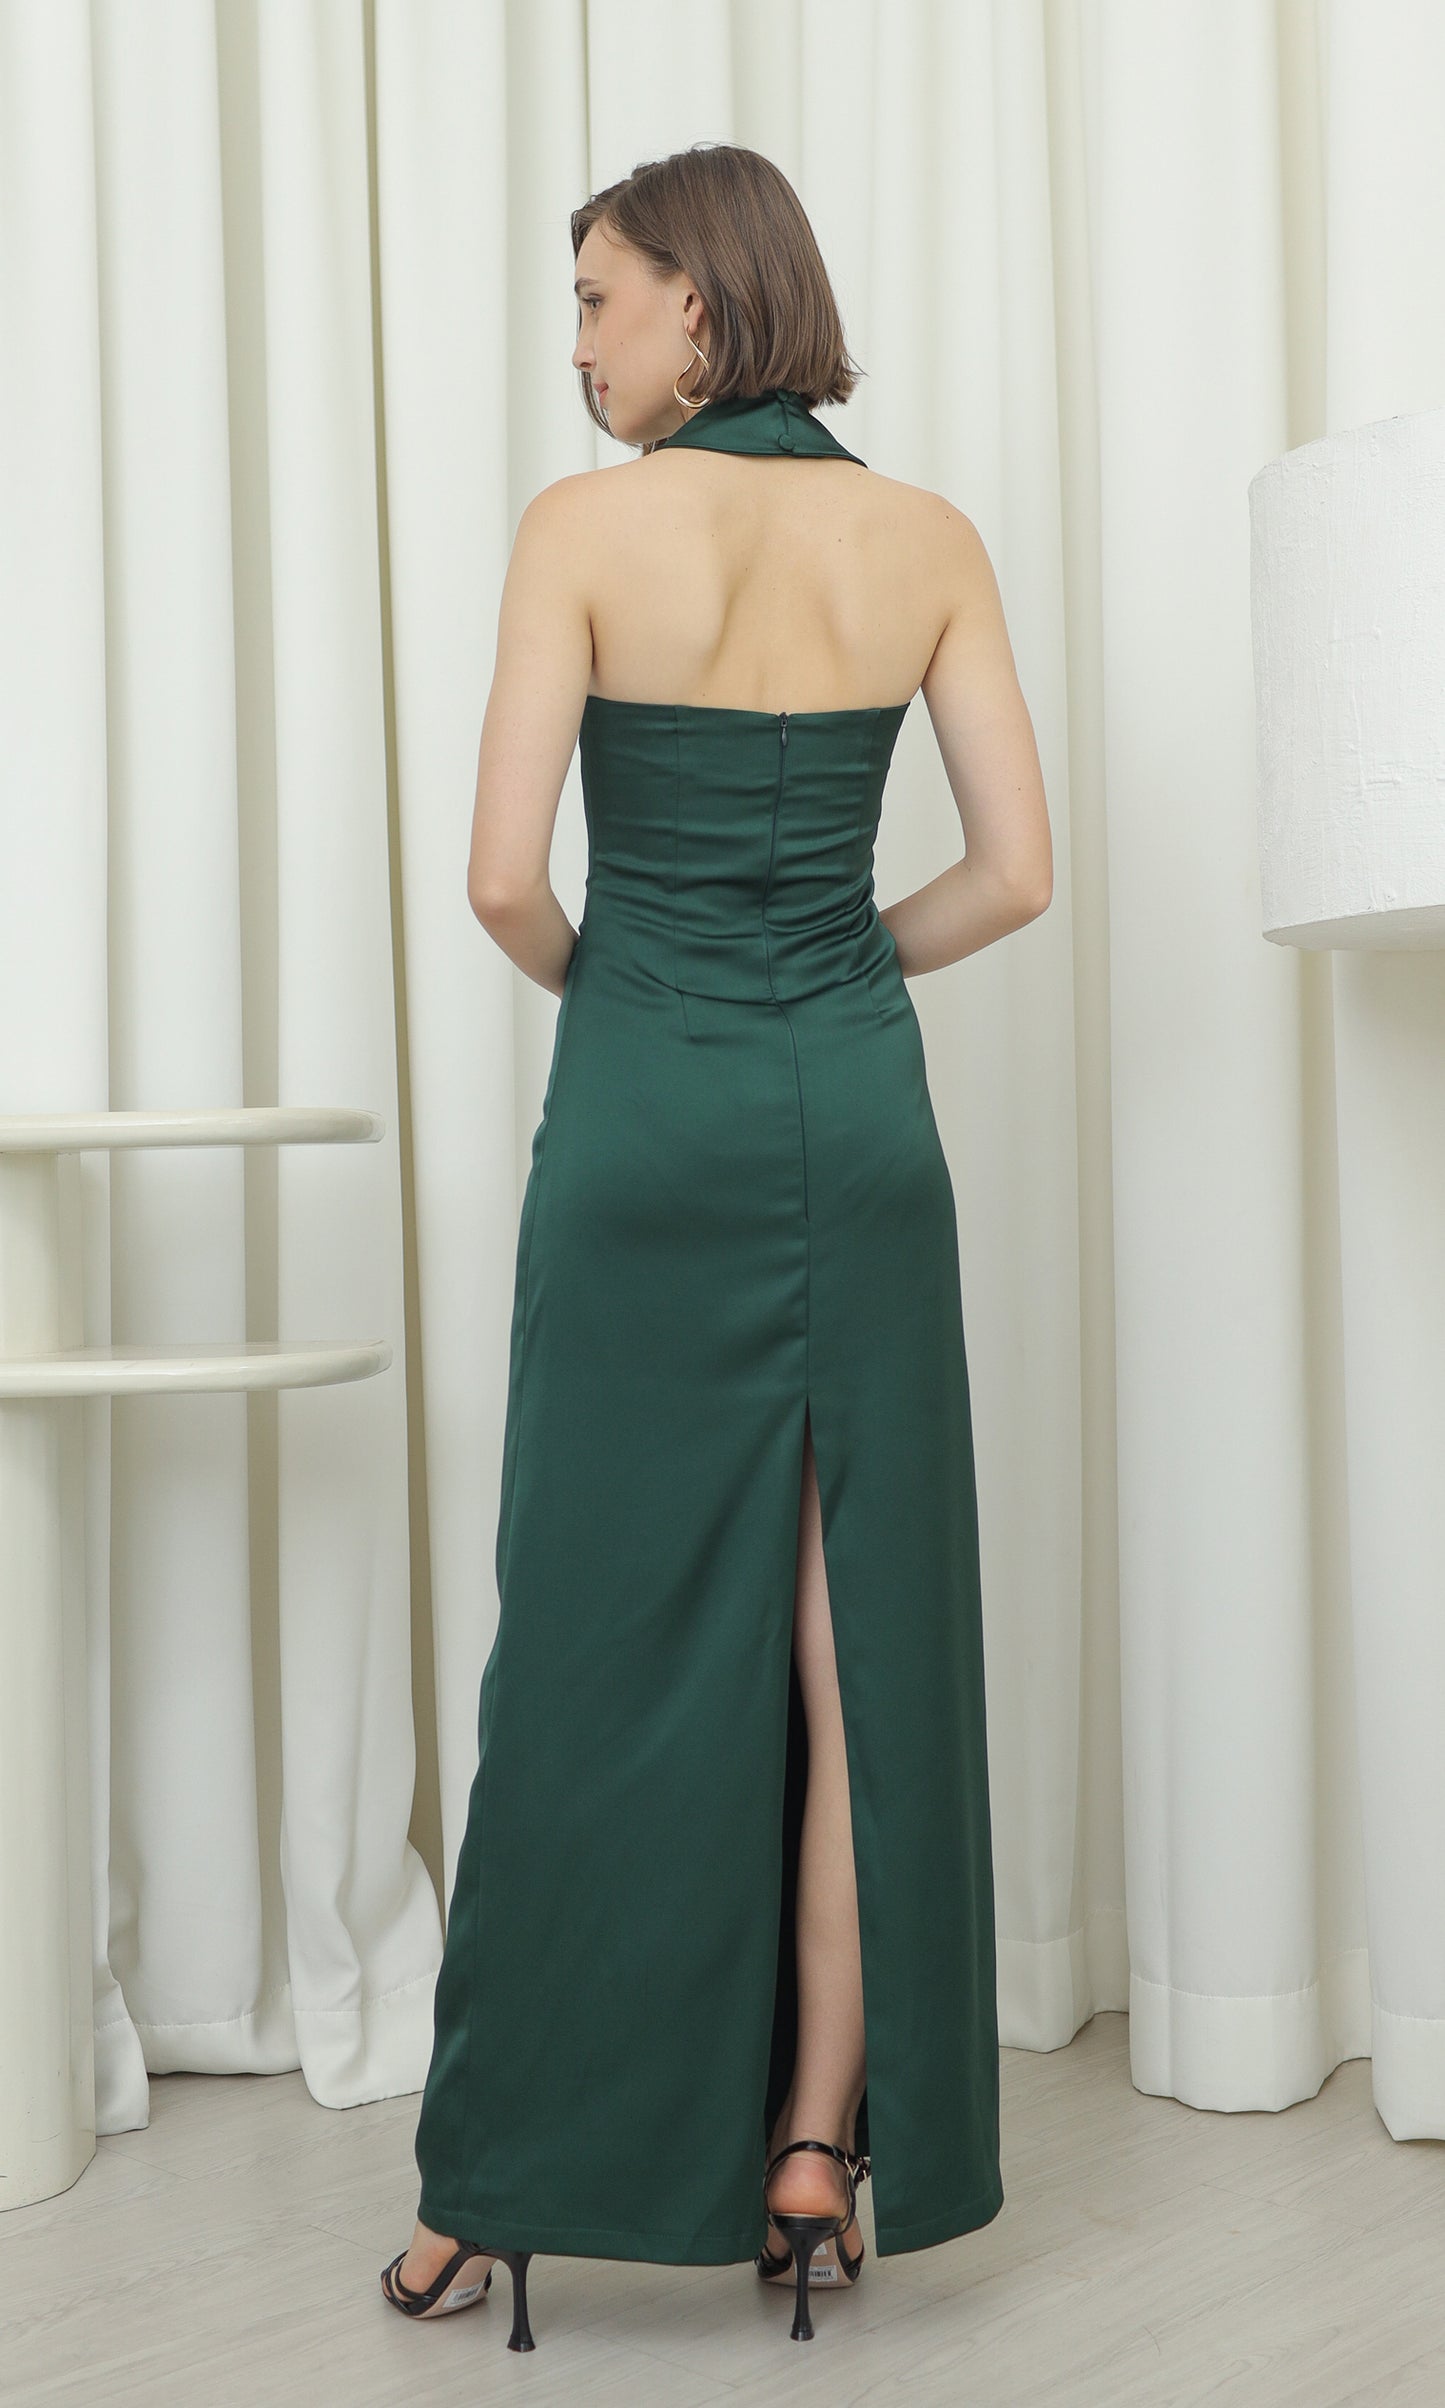 Angy Dress in Emerald